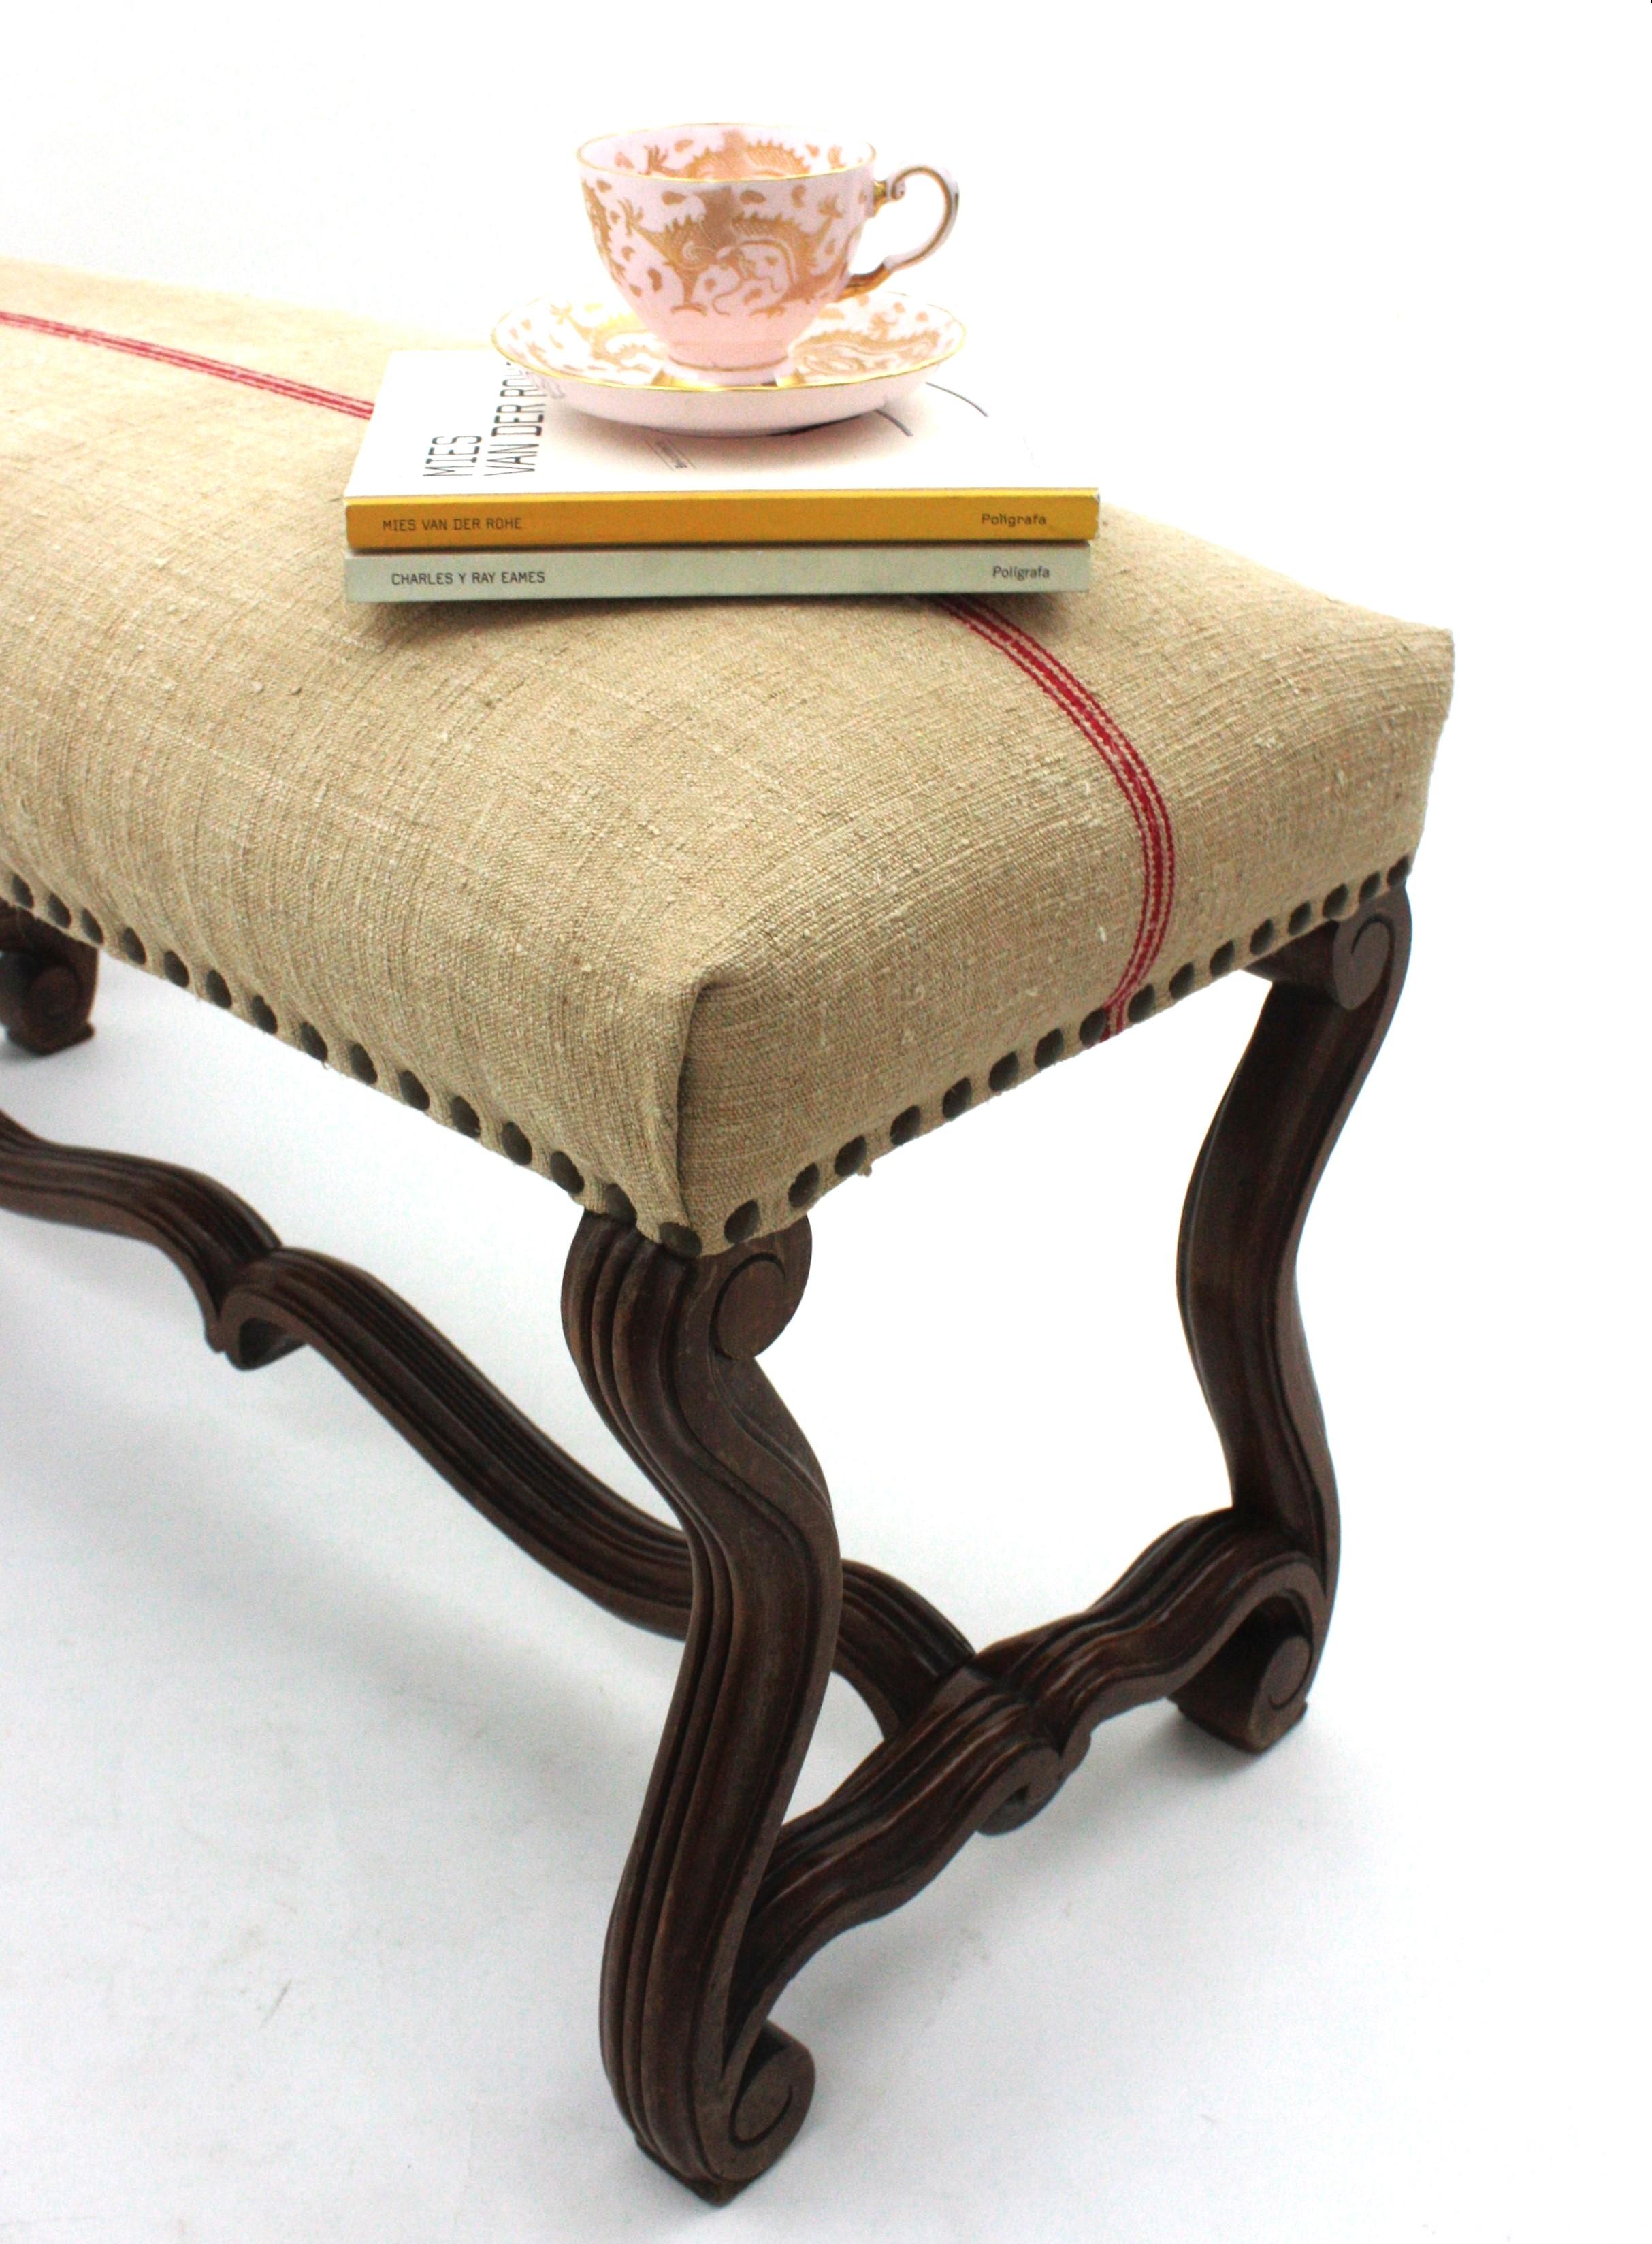 20th Century Os de Mouton Louis XIV Walnut Bench with French Linen Upholstery For Sale